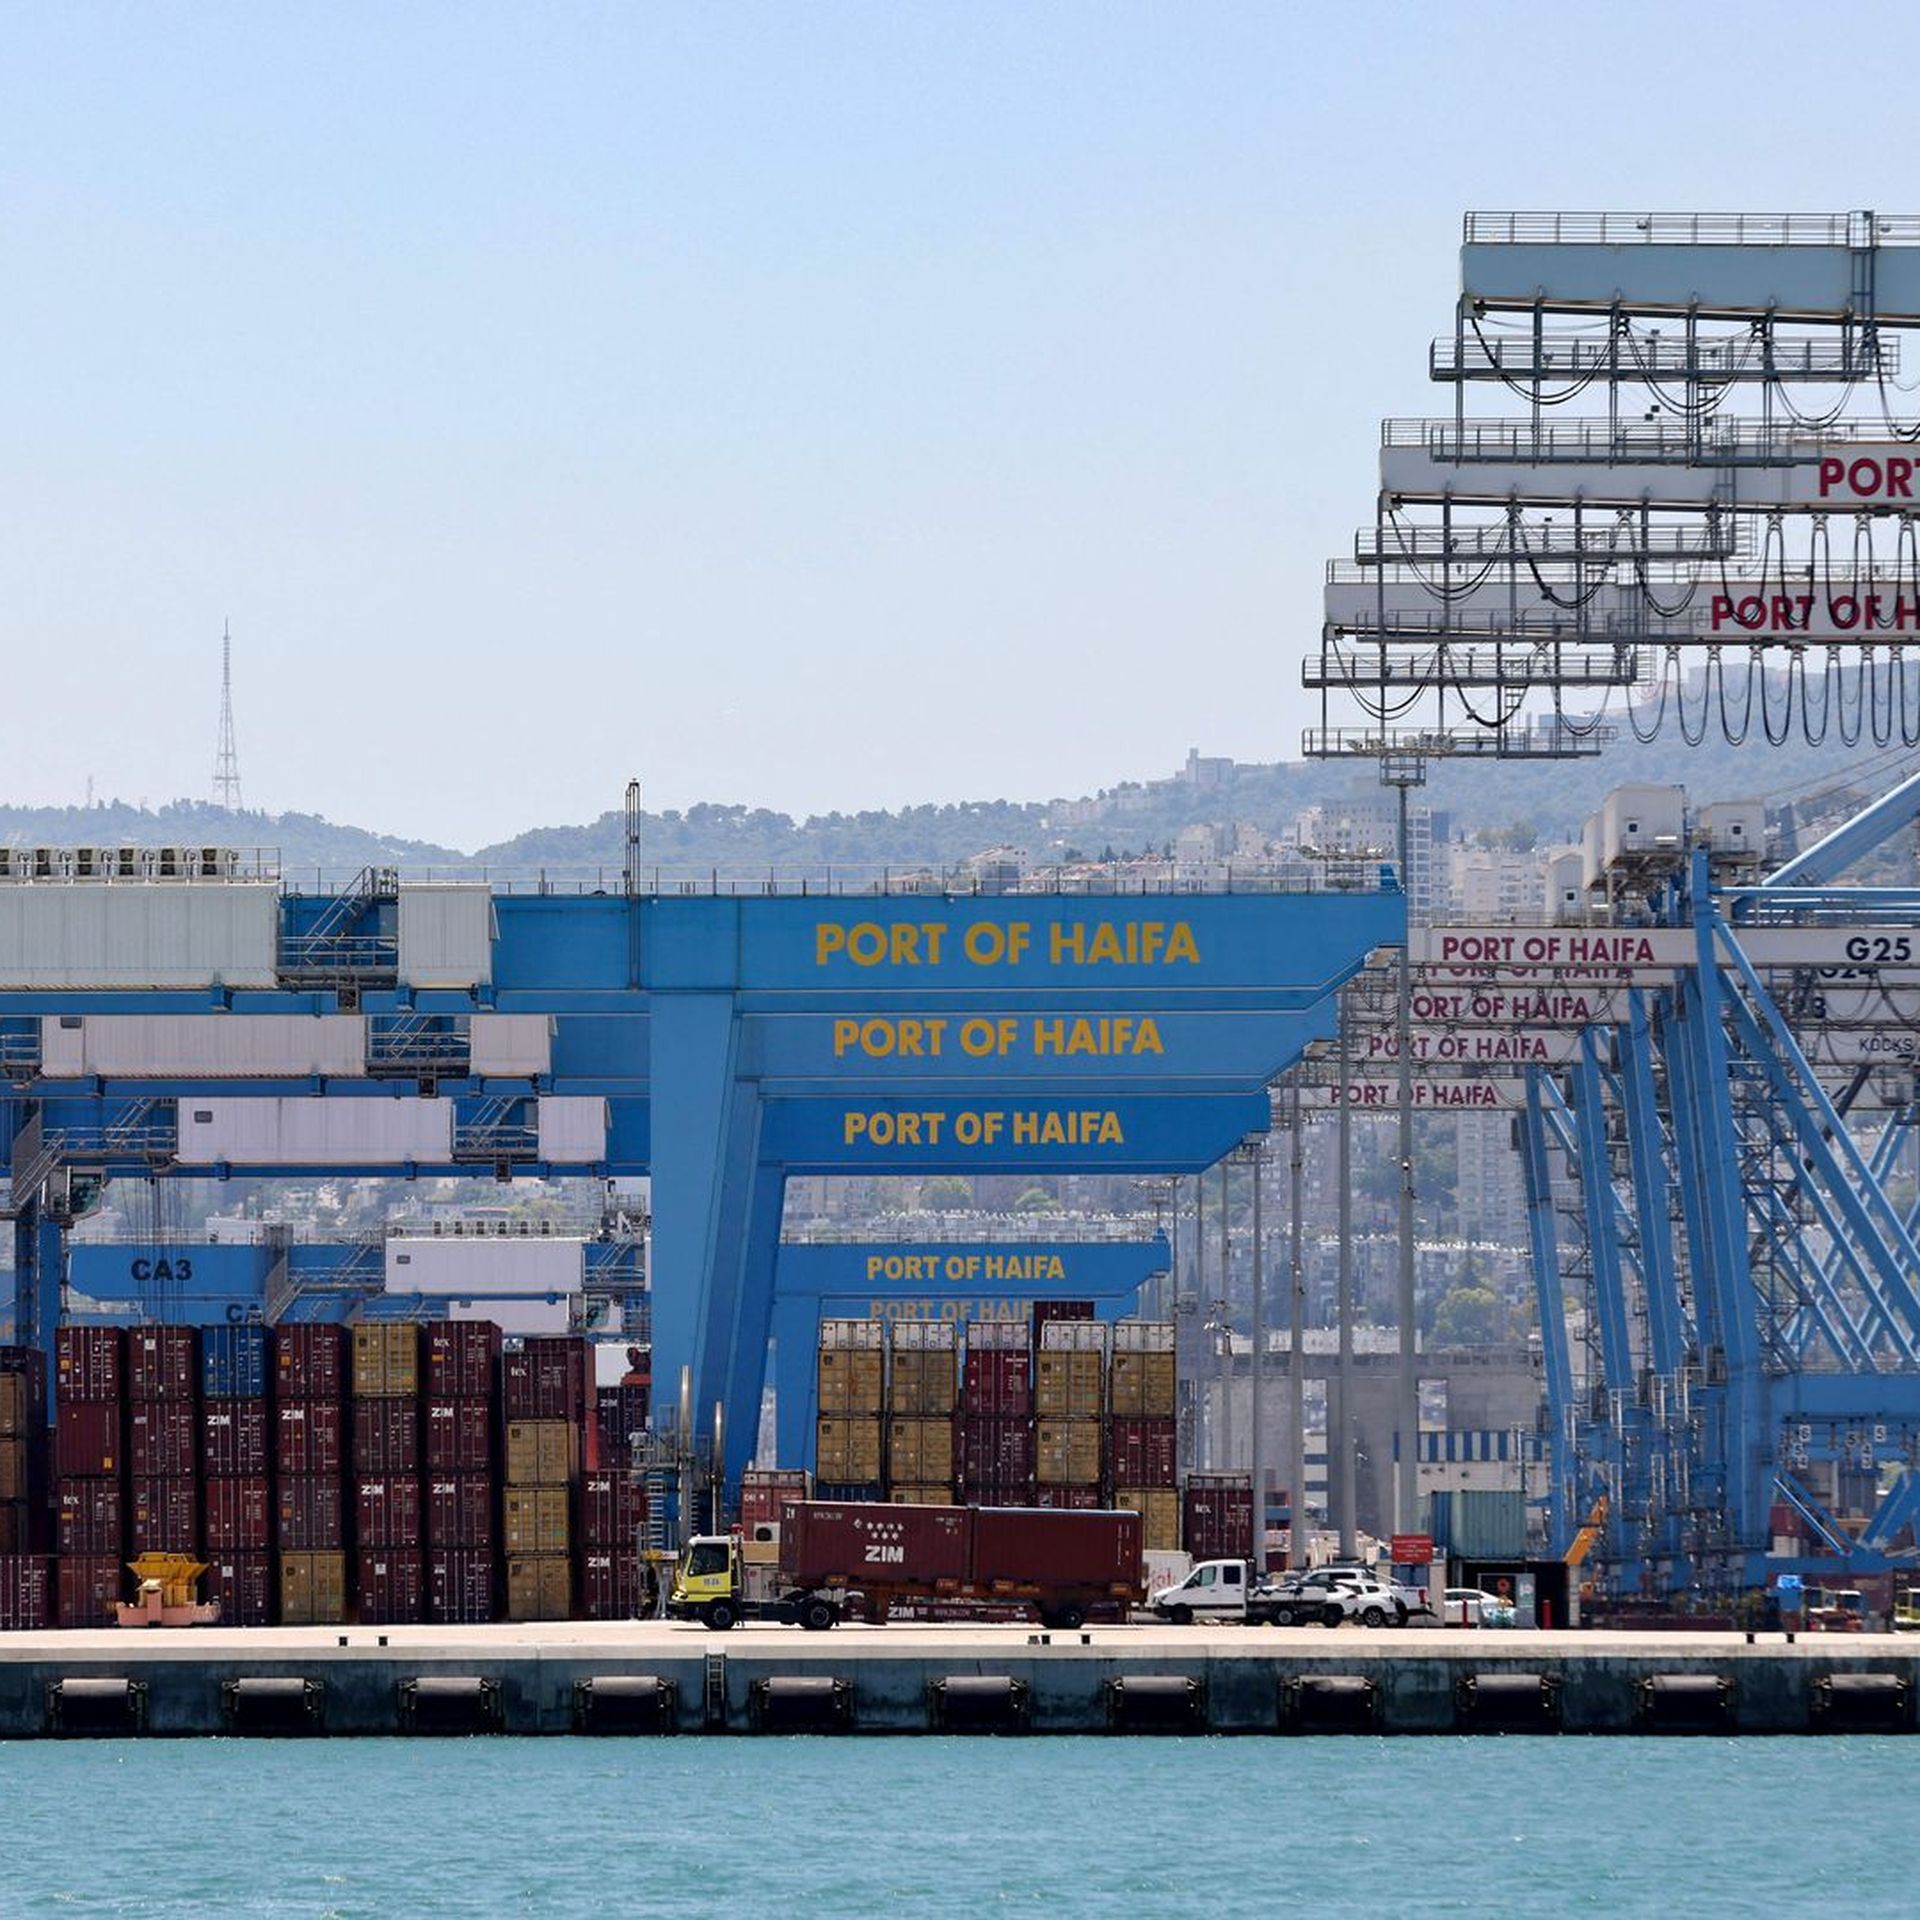 The U.S. has raised concerns about Chinese investment in the Port of Haifa project.